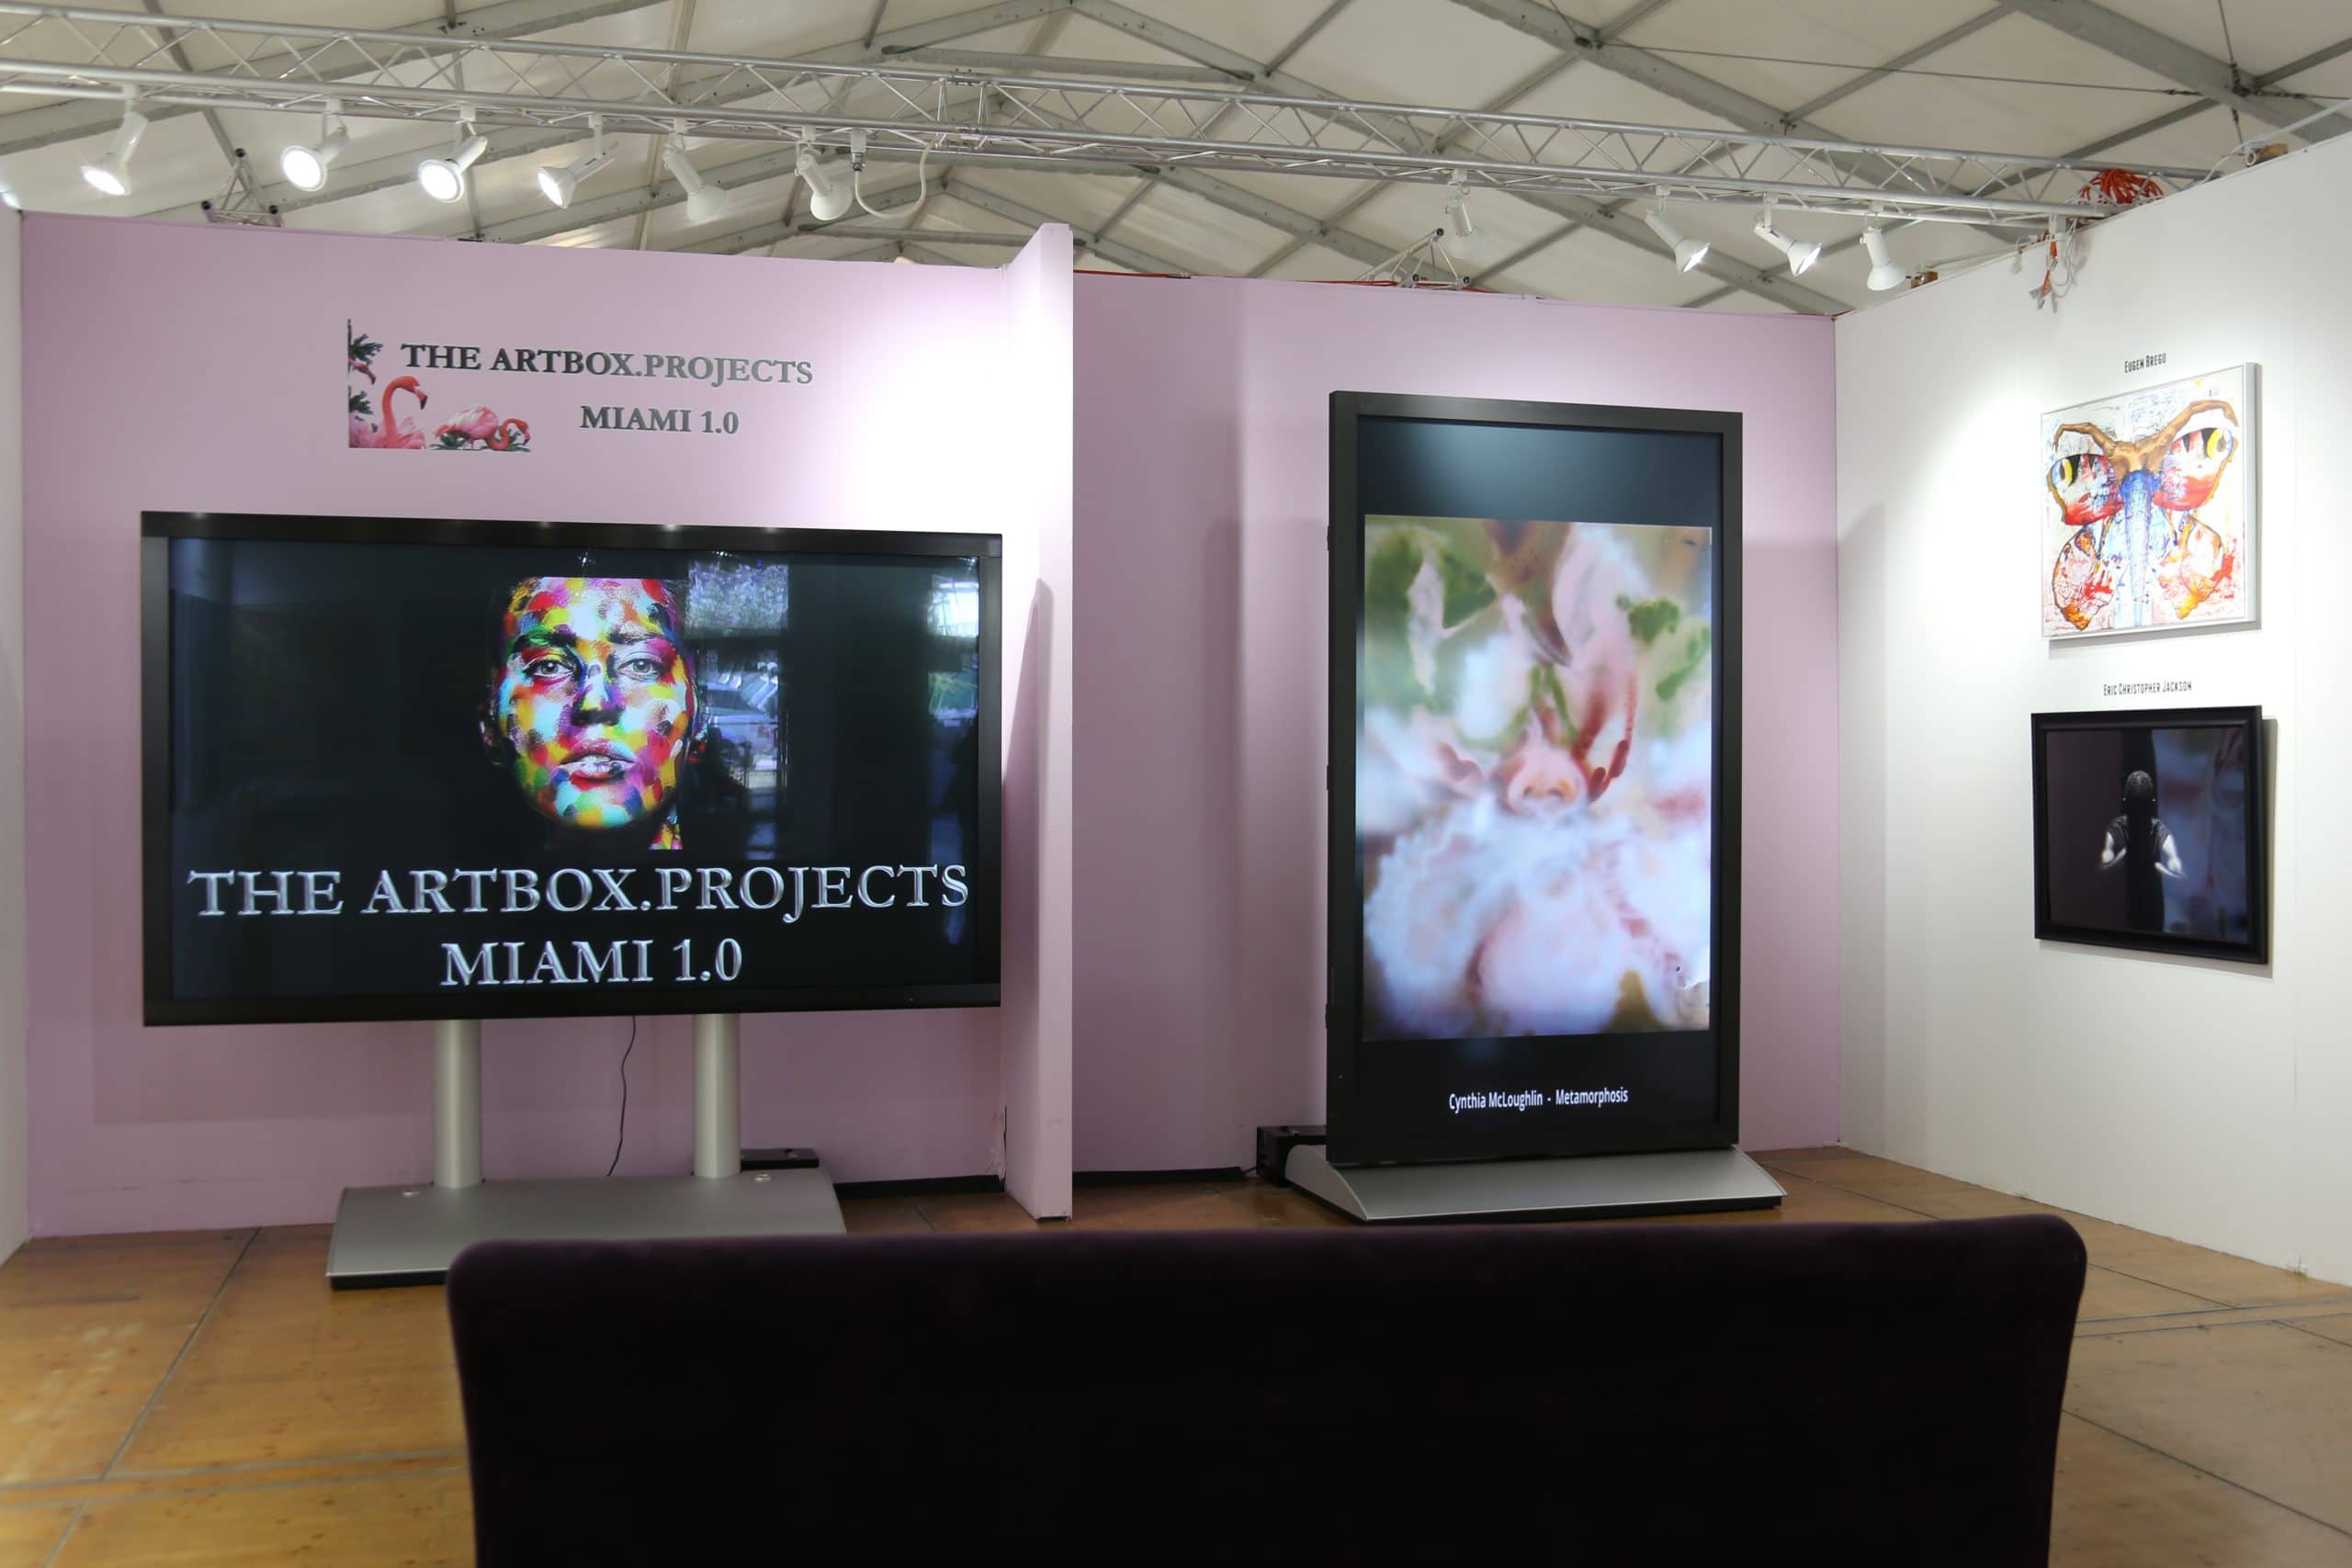 A large orchid/iris hybrid in soft pinks and mossy greens, spray painted by artist Cynthia McLoughlin, displayed in the Artbox Project's booth at the Miami Spectrum show, 2016.